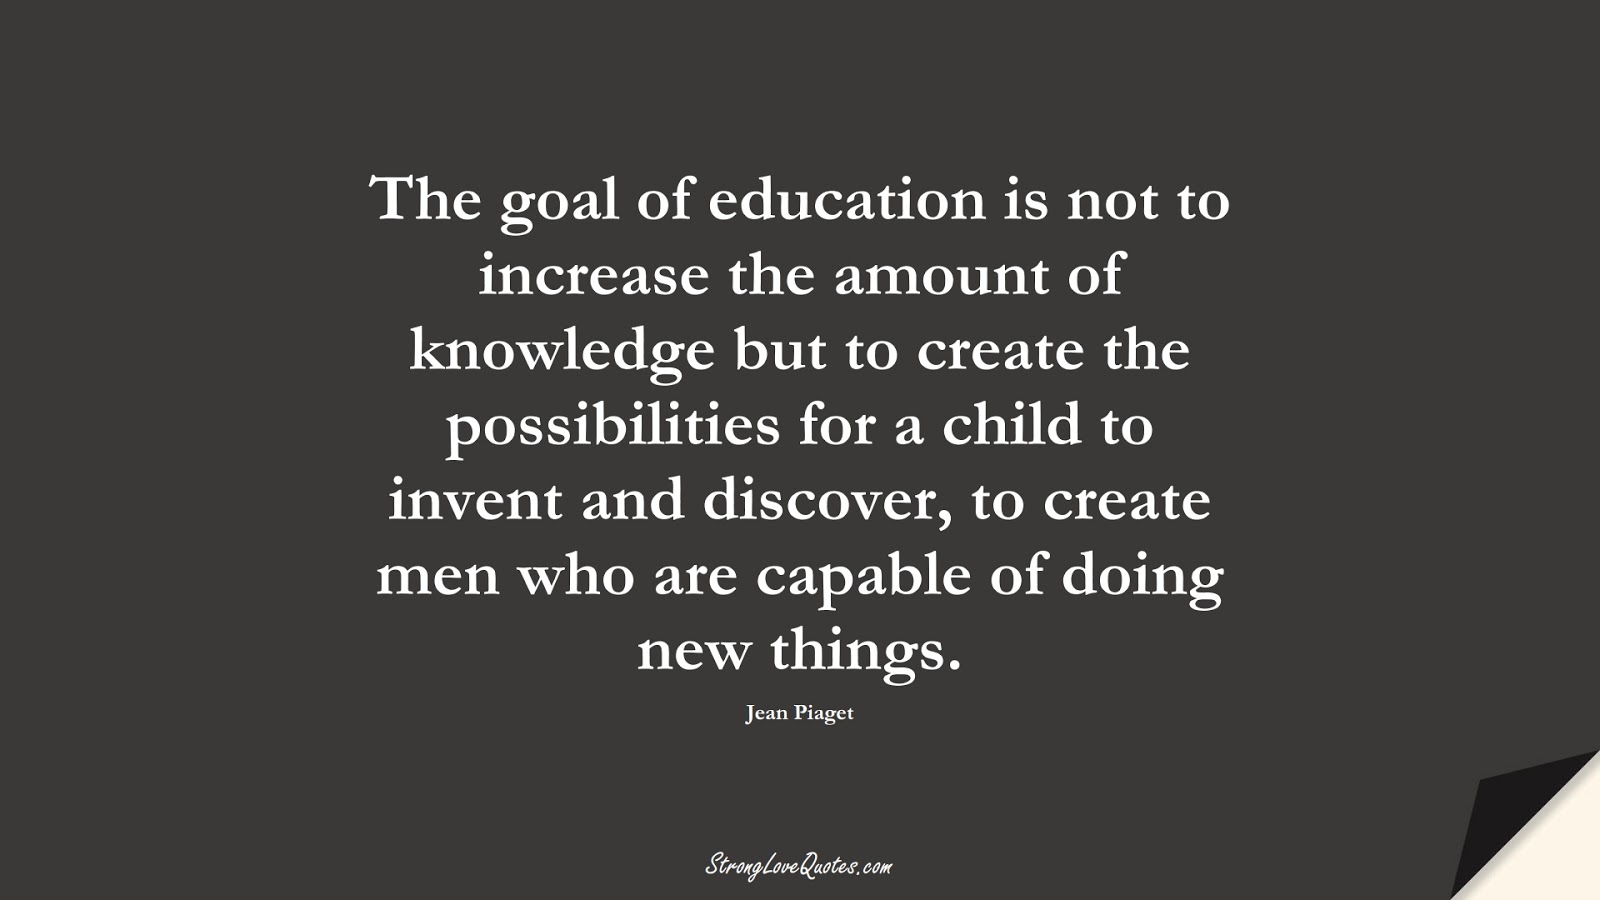 The goal of education is not to increase the amount of knowledge but to create the possibilities for a child to invent and discover, to create men who are capable of doing new things. (Jean Piaget);  #KnowledgeQuotes